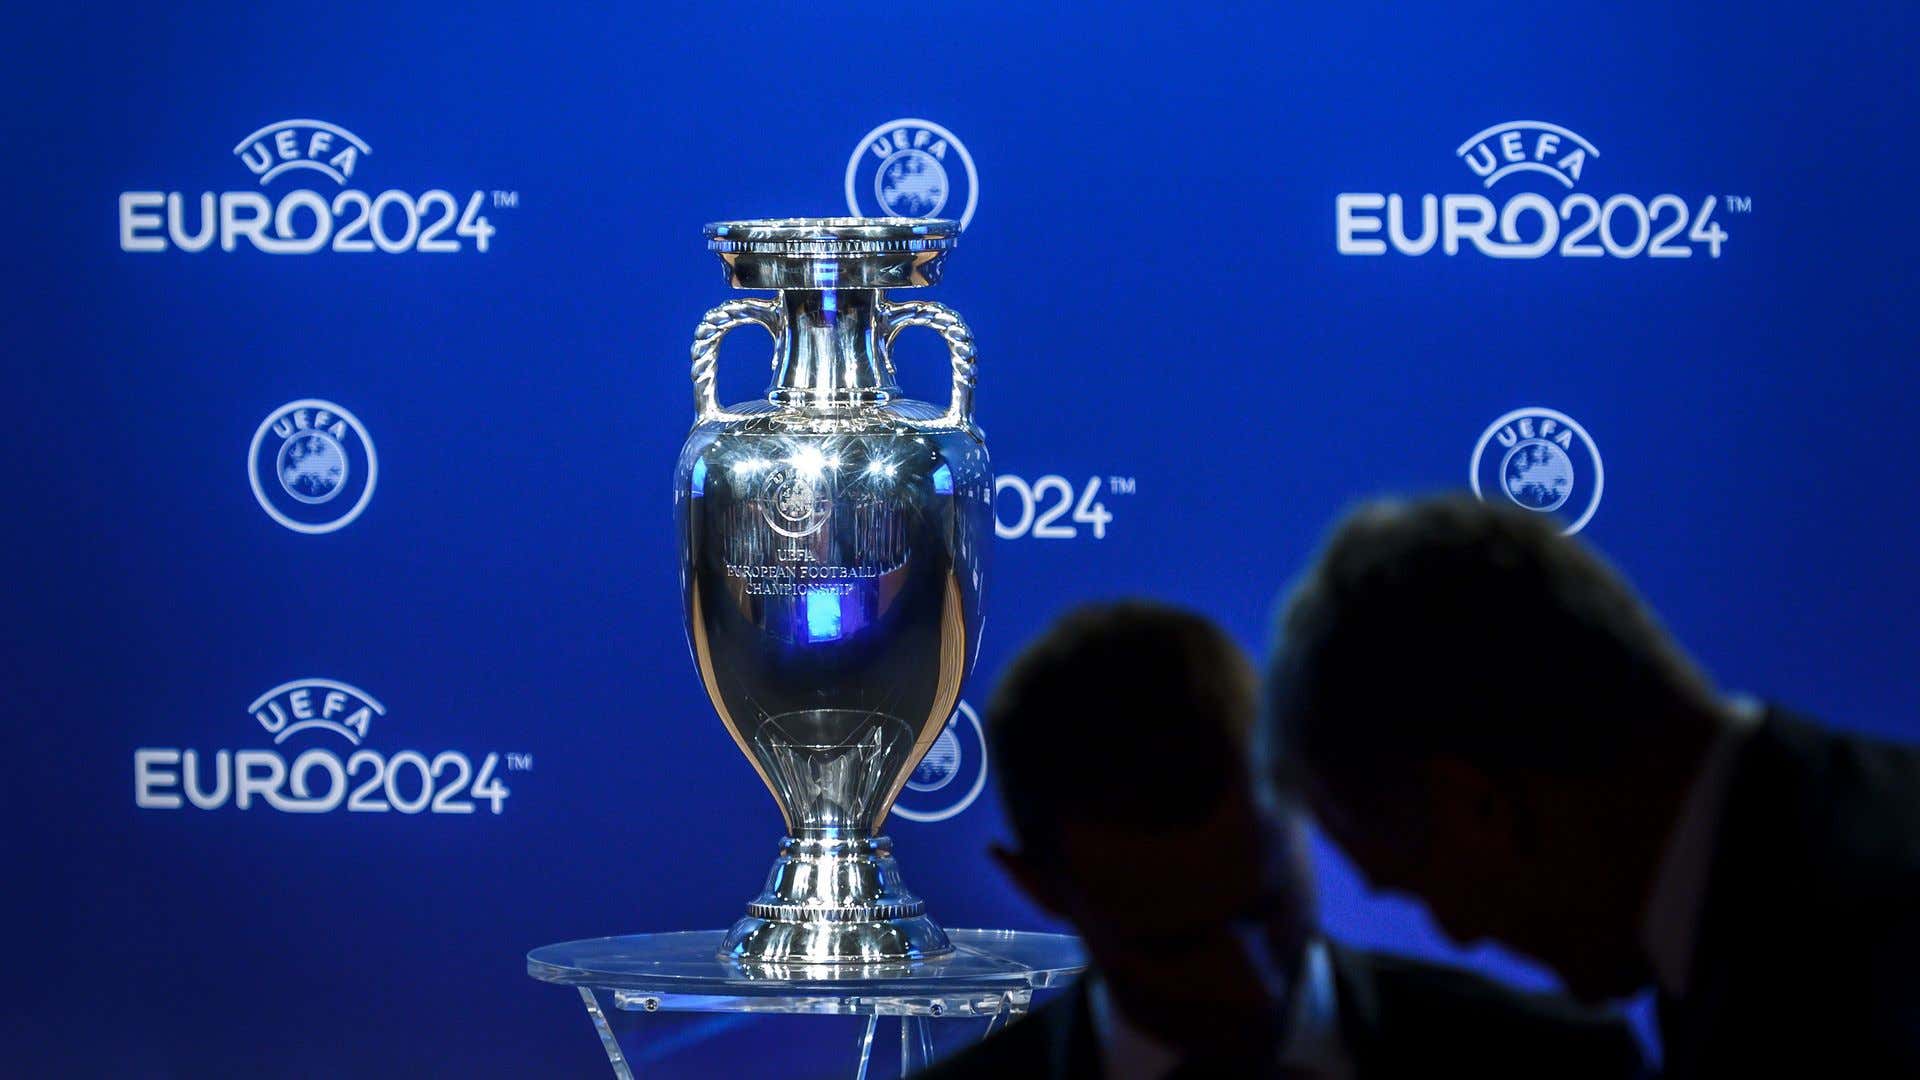 How many teams qualify for Euro 2024?